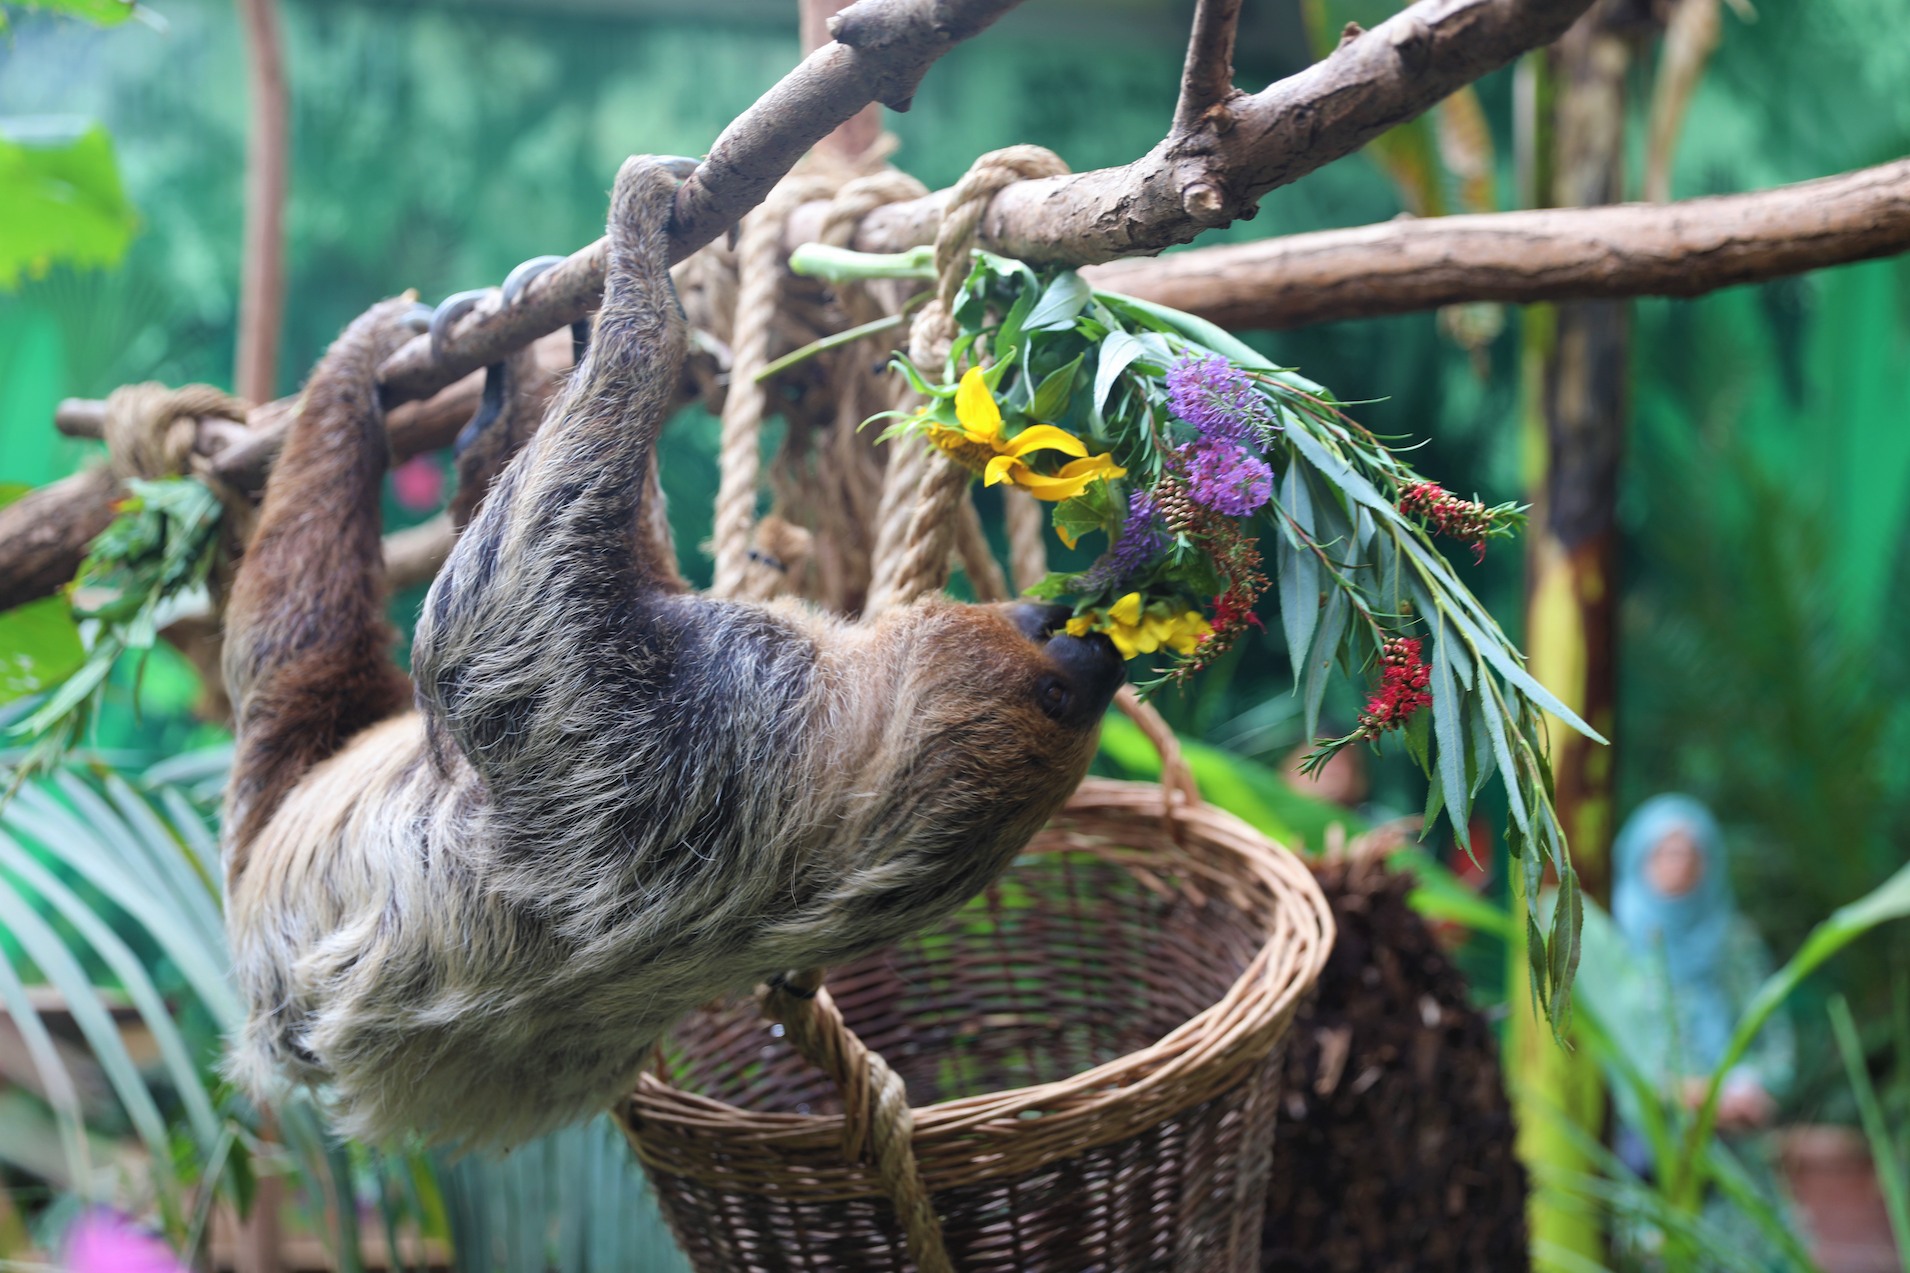 Sloth Mo hanging upside down eating flower boquet hanging on tree

Image: AMY MIDDLETON 2022